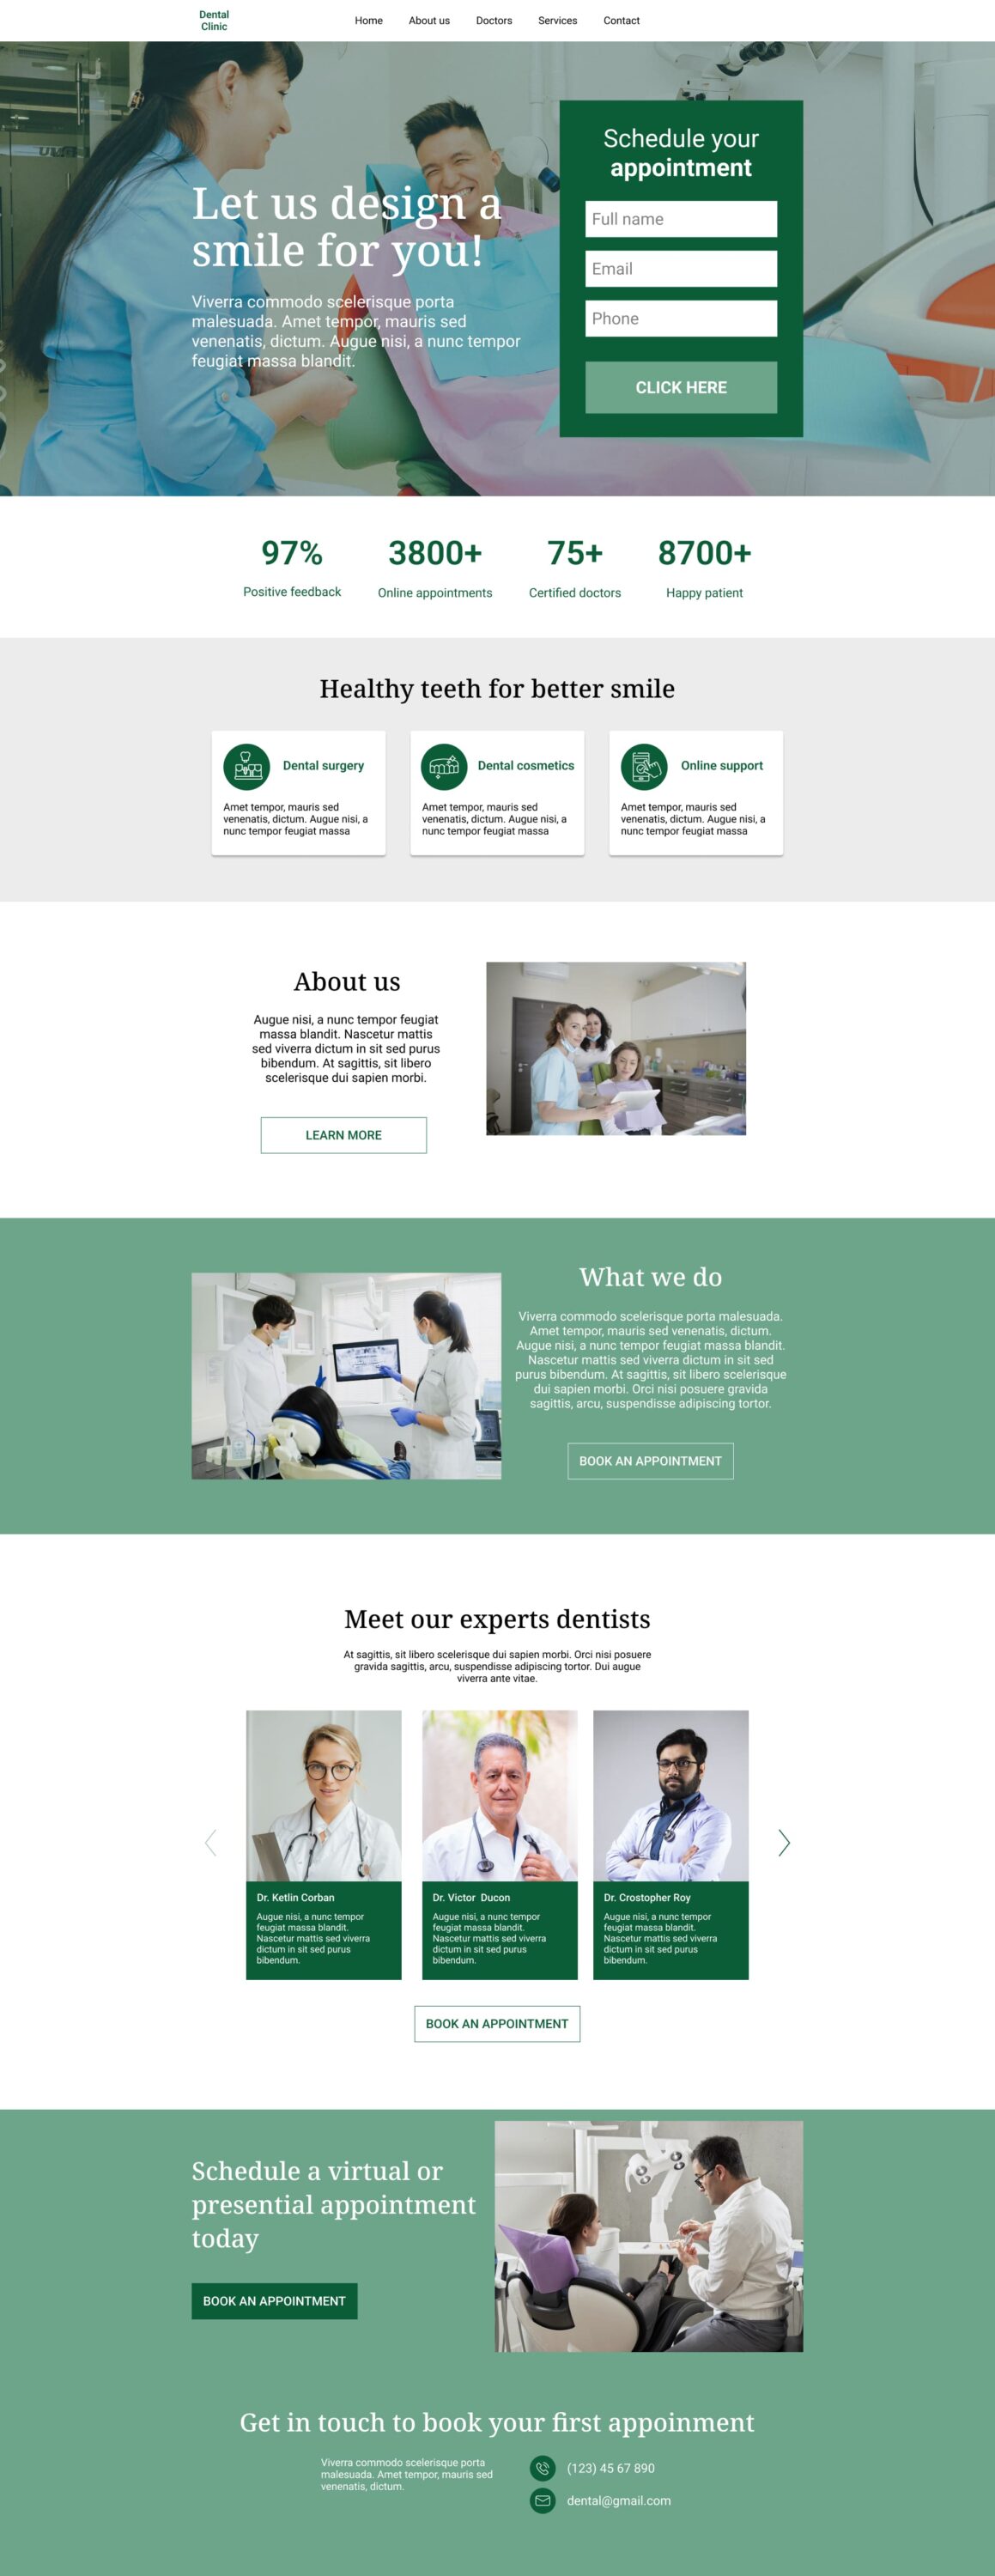 White and green template for landing page.